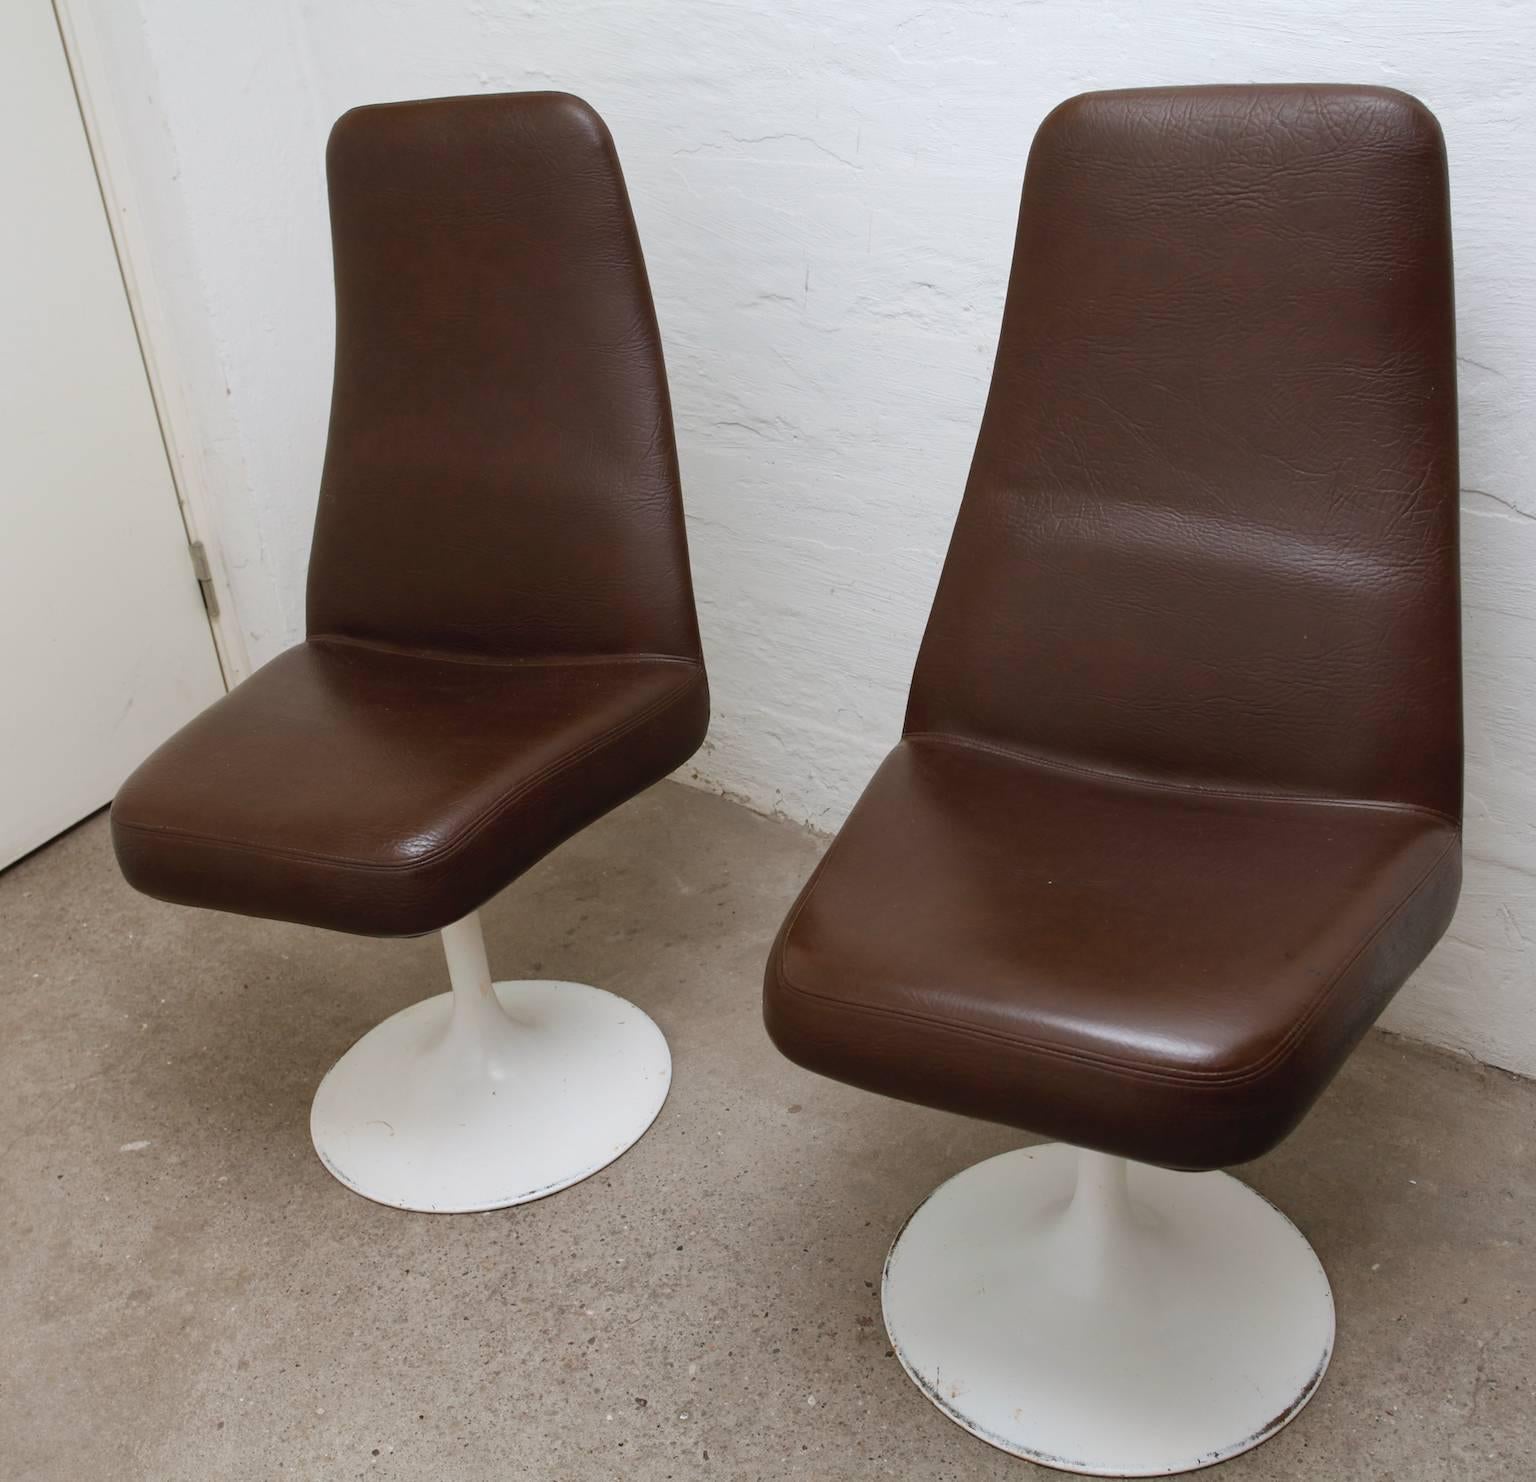 Late 20th Century Two Chairs with Matching Table and Tulip foot by Johanson Design, Sweden, 1970s For Sale